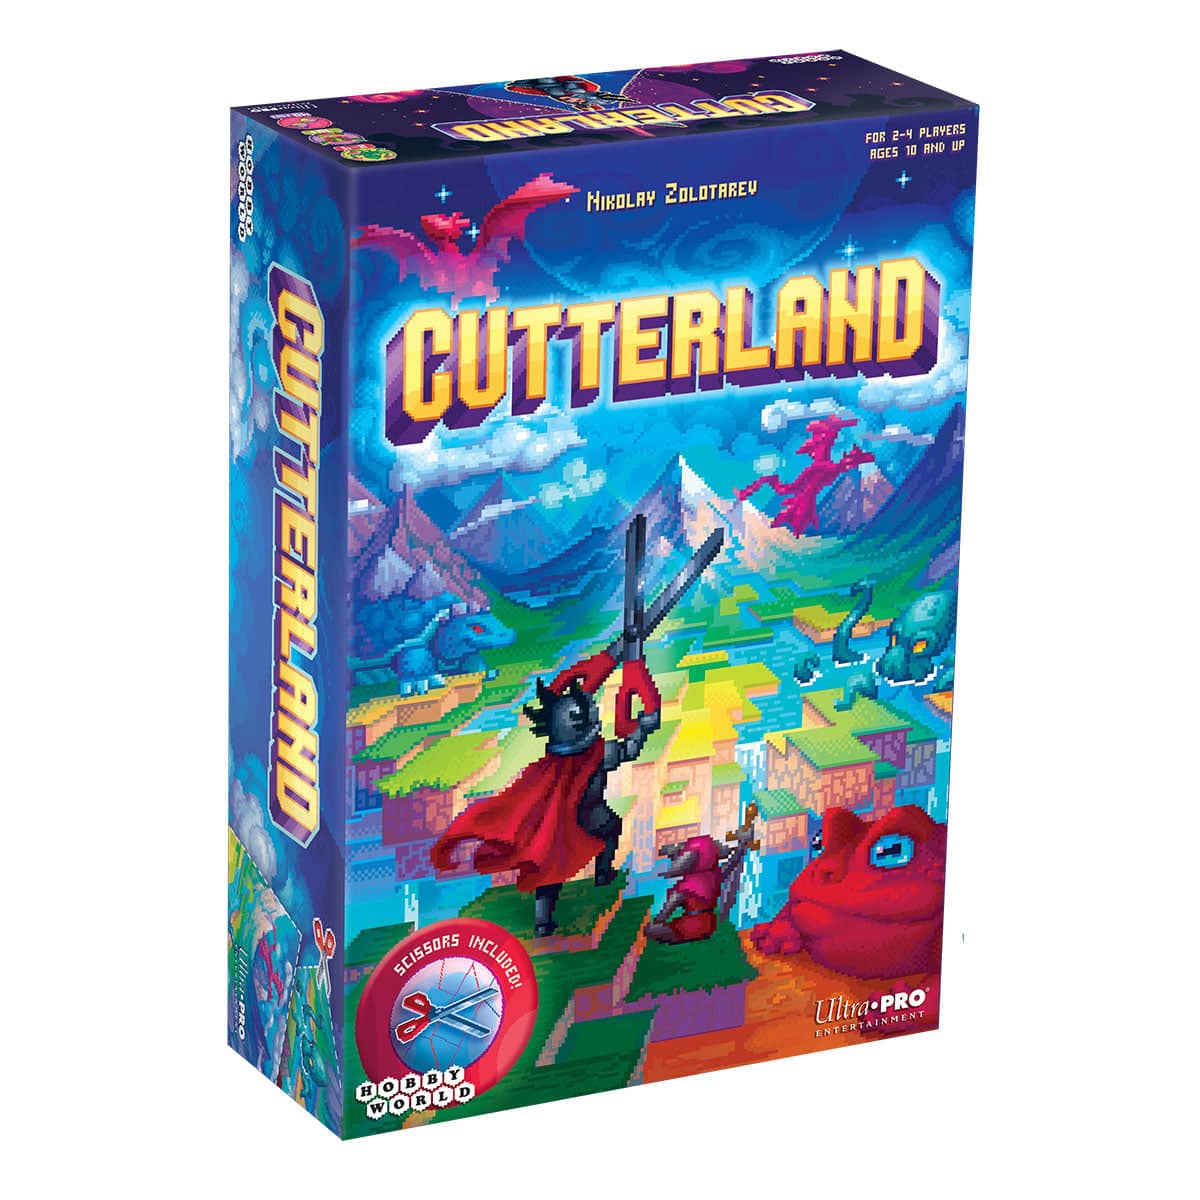 Cutterland | A card cutting game for ages 10 and up | Ultra PRO Entertainment